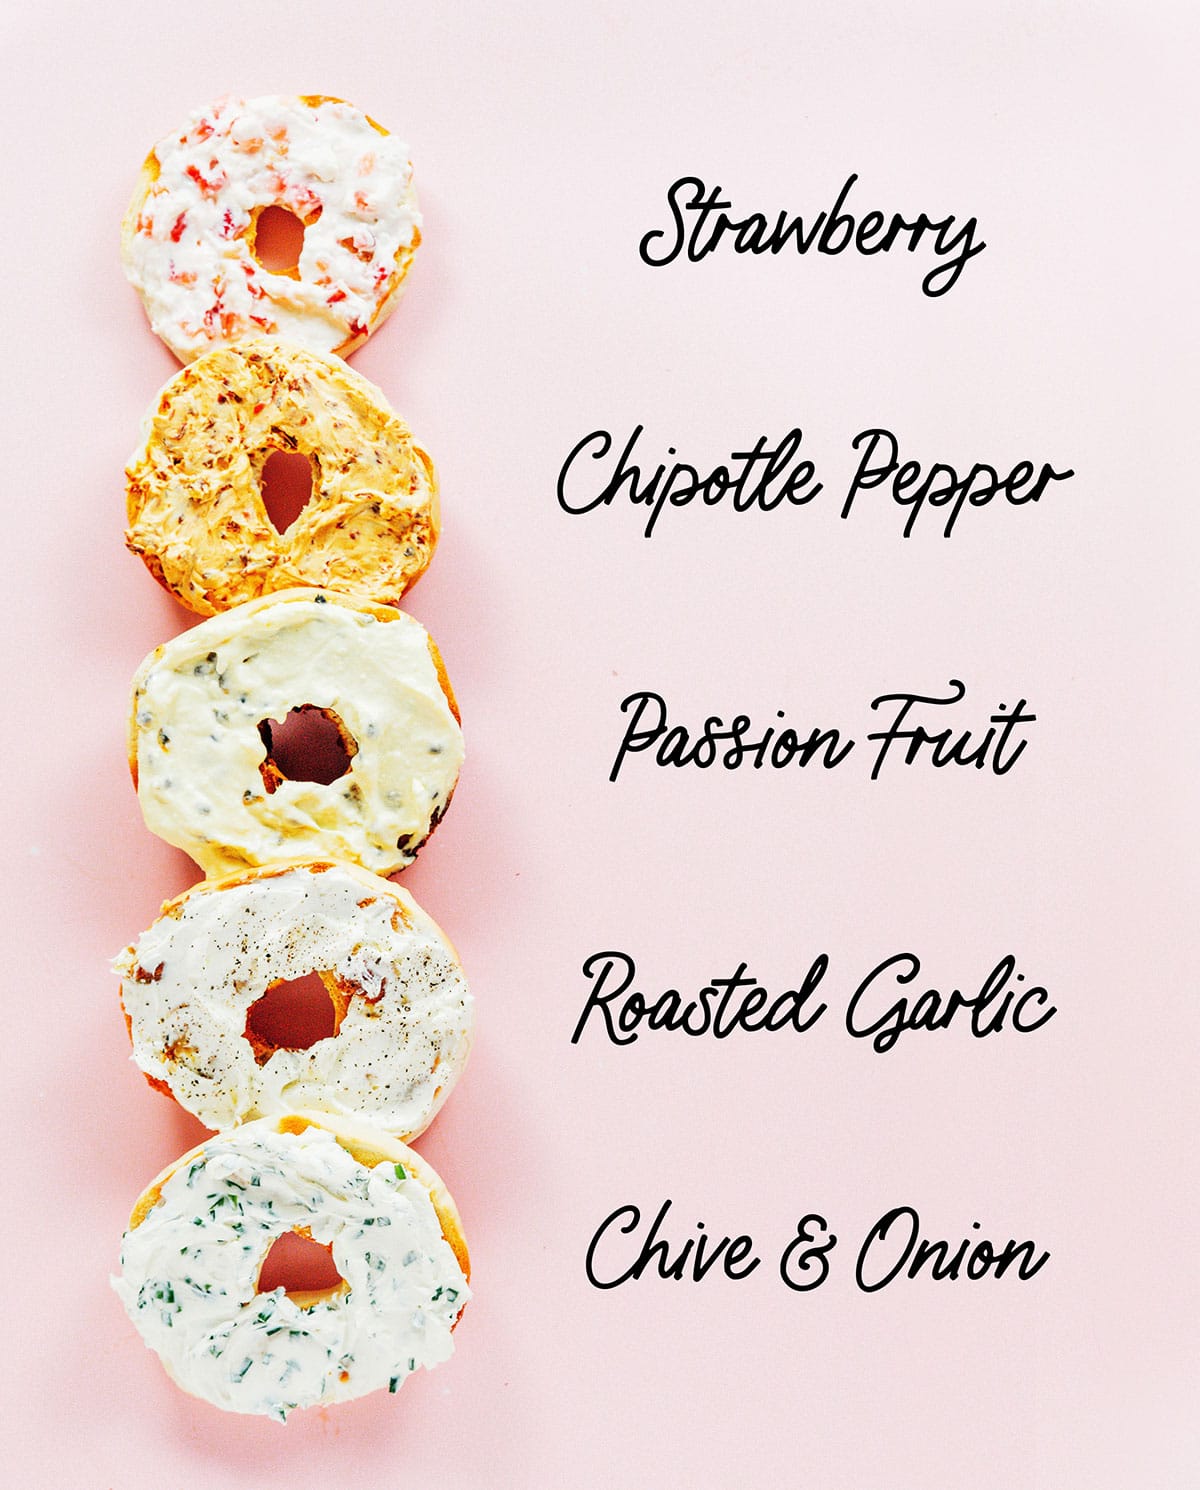 Bagel halves spread with various flavors of cream cheese on a pink surface.